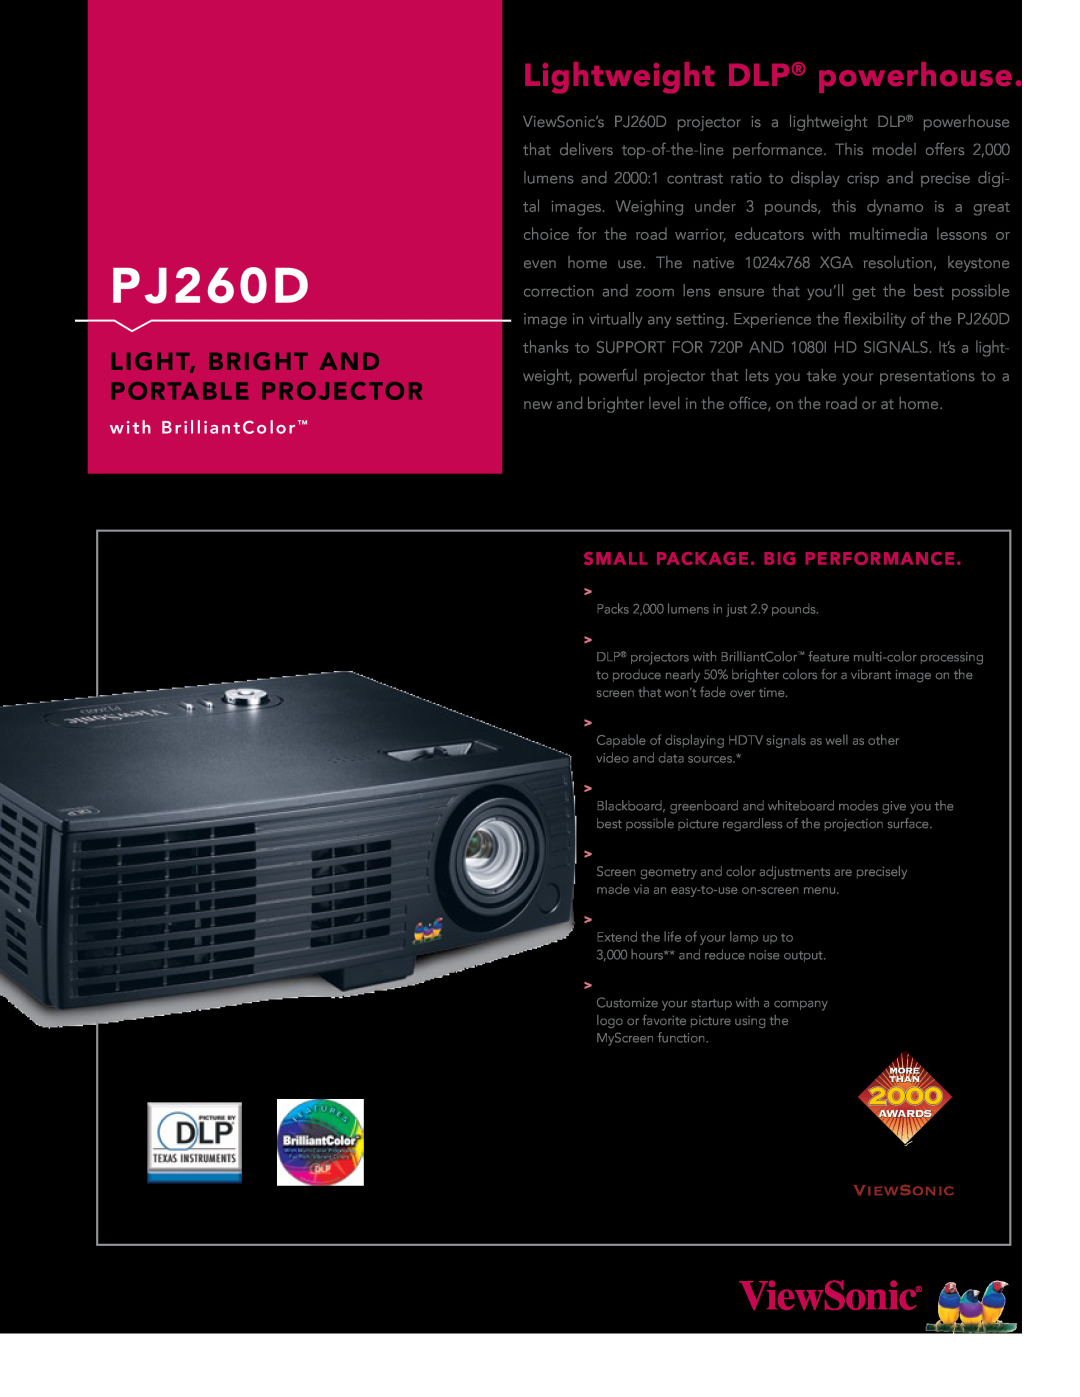 ViewSonic PJ260D manual Lightweight DLP powerhouse, Light, Bright And Portable Projector, with BrilliantColor 